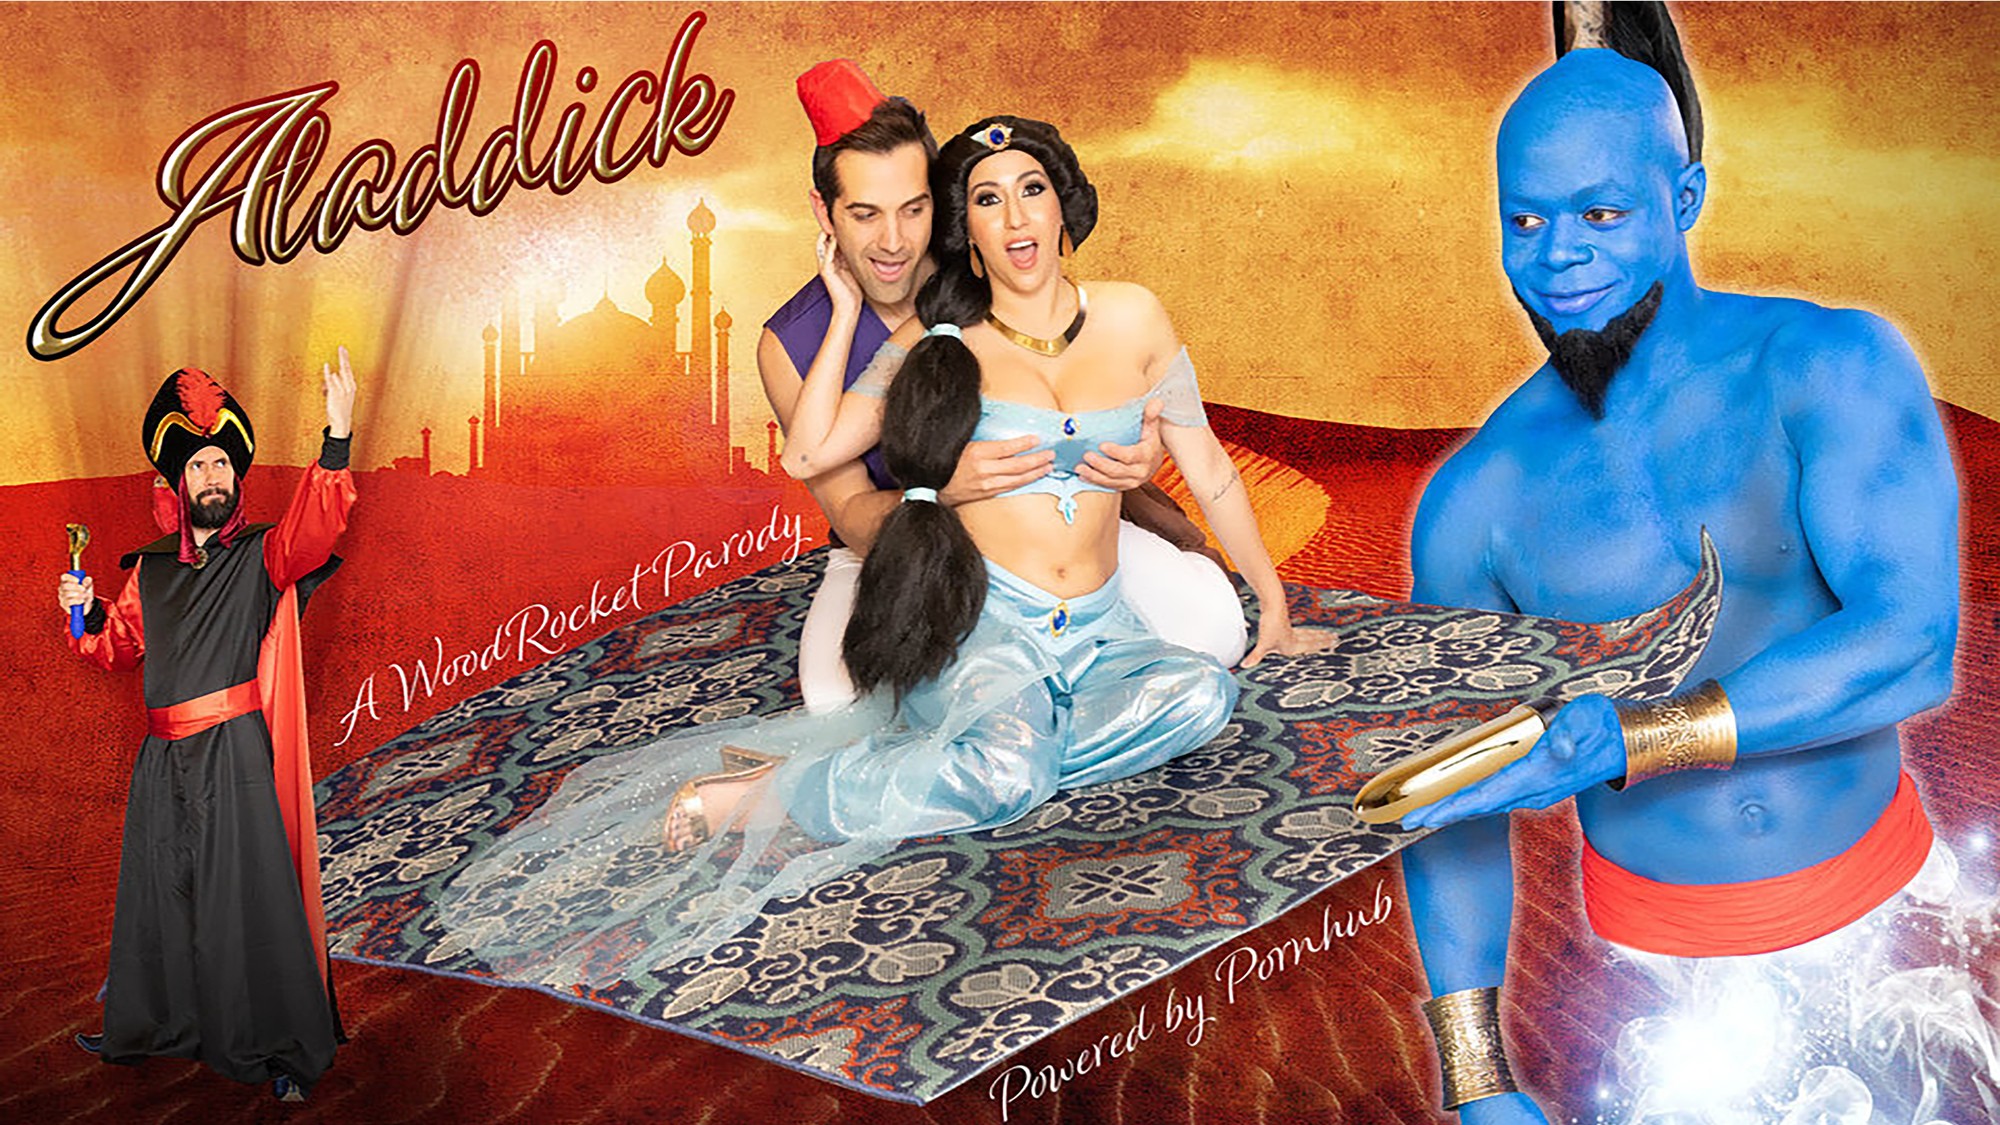 Aladdin Cartoon Erotica - The 'Aladdin' Porn Parody Is Here and We Fixed Its Title - VICE